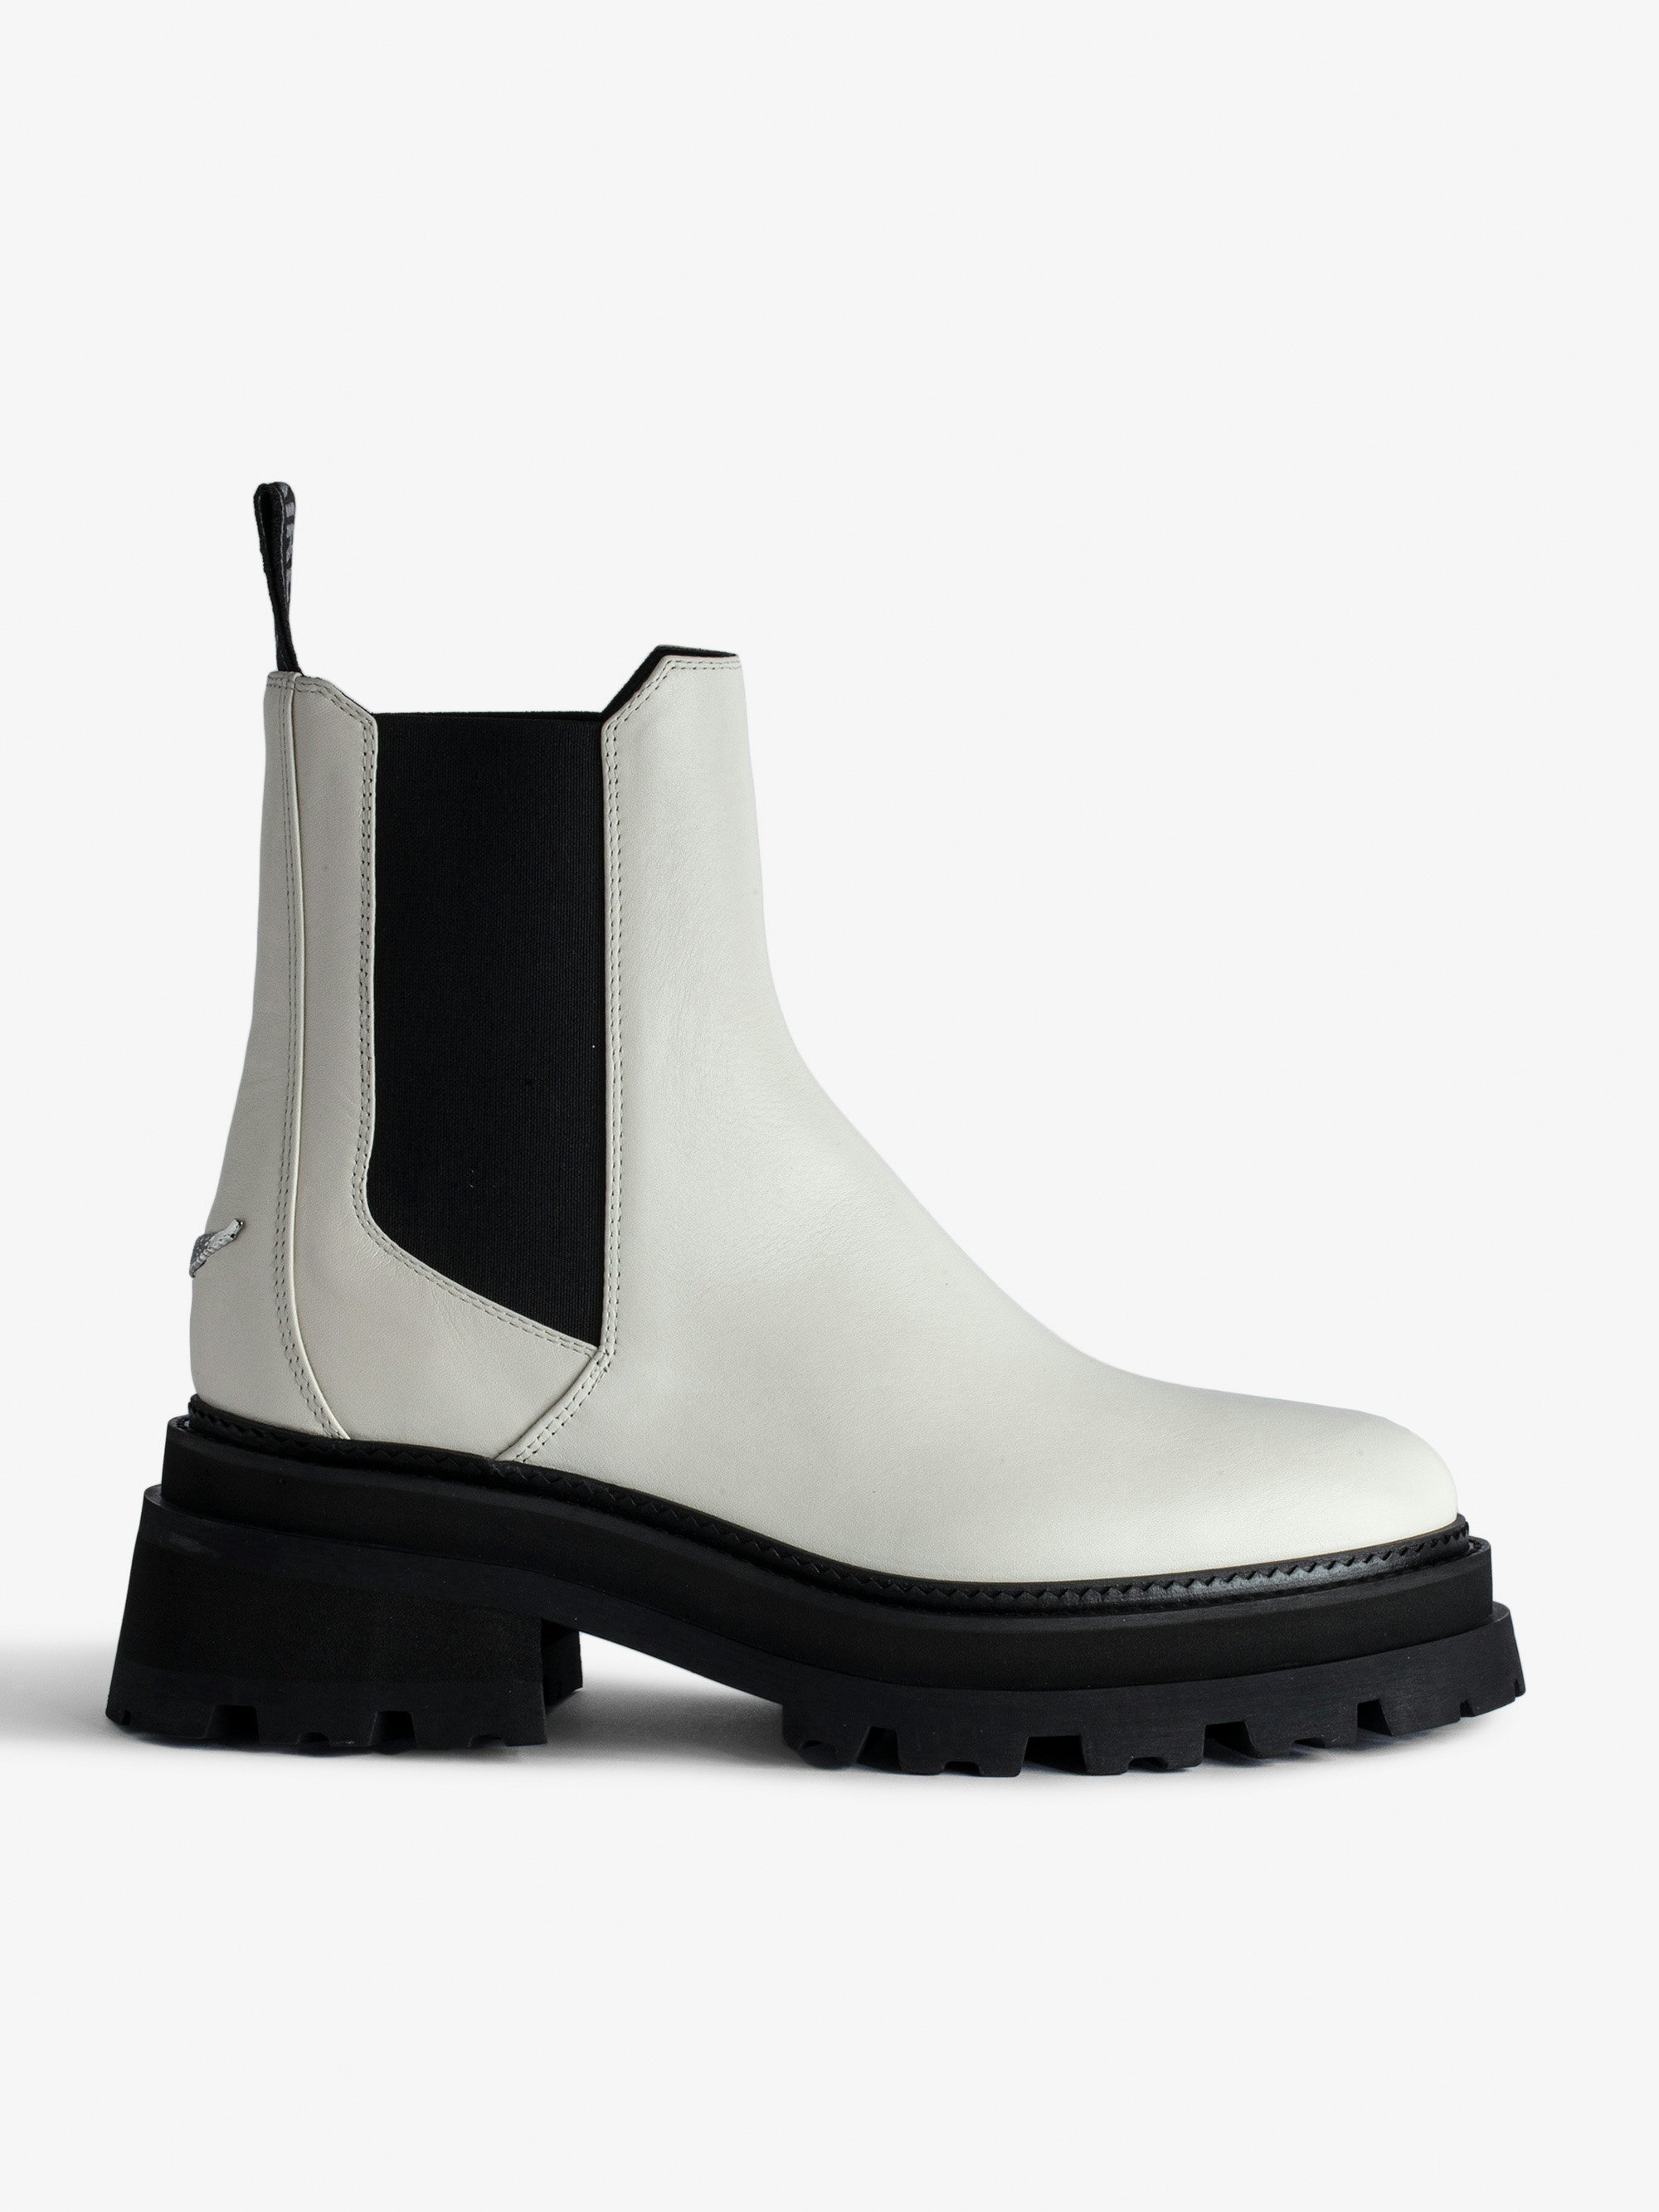 Ride Chelsea Boots - Women’s ecru semi-patent smooth leather Chelsea boots with wings charm.